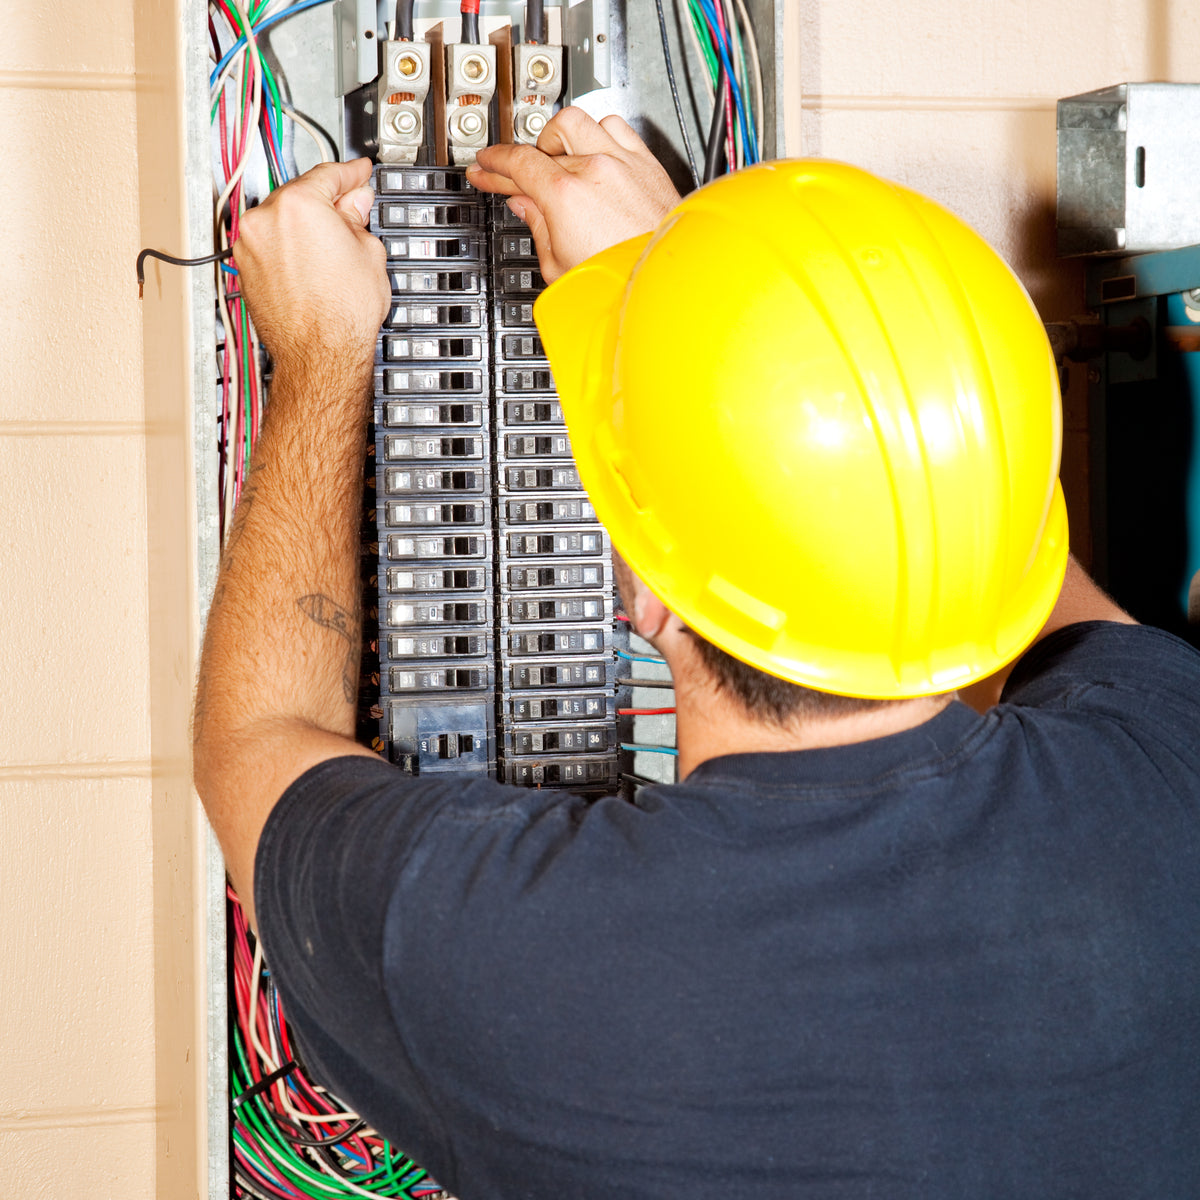 Everything You Need to Know About How to Replace a Circuit Breaker